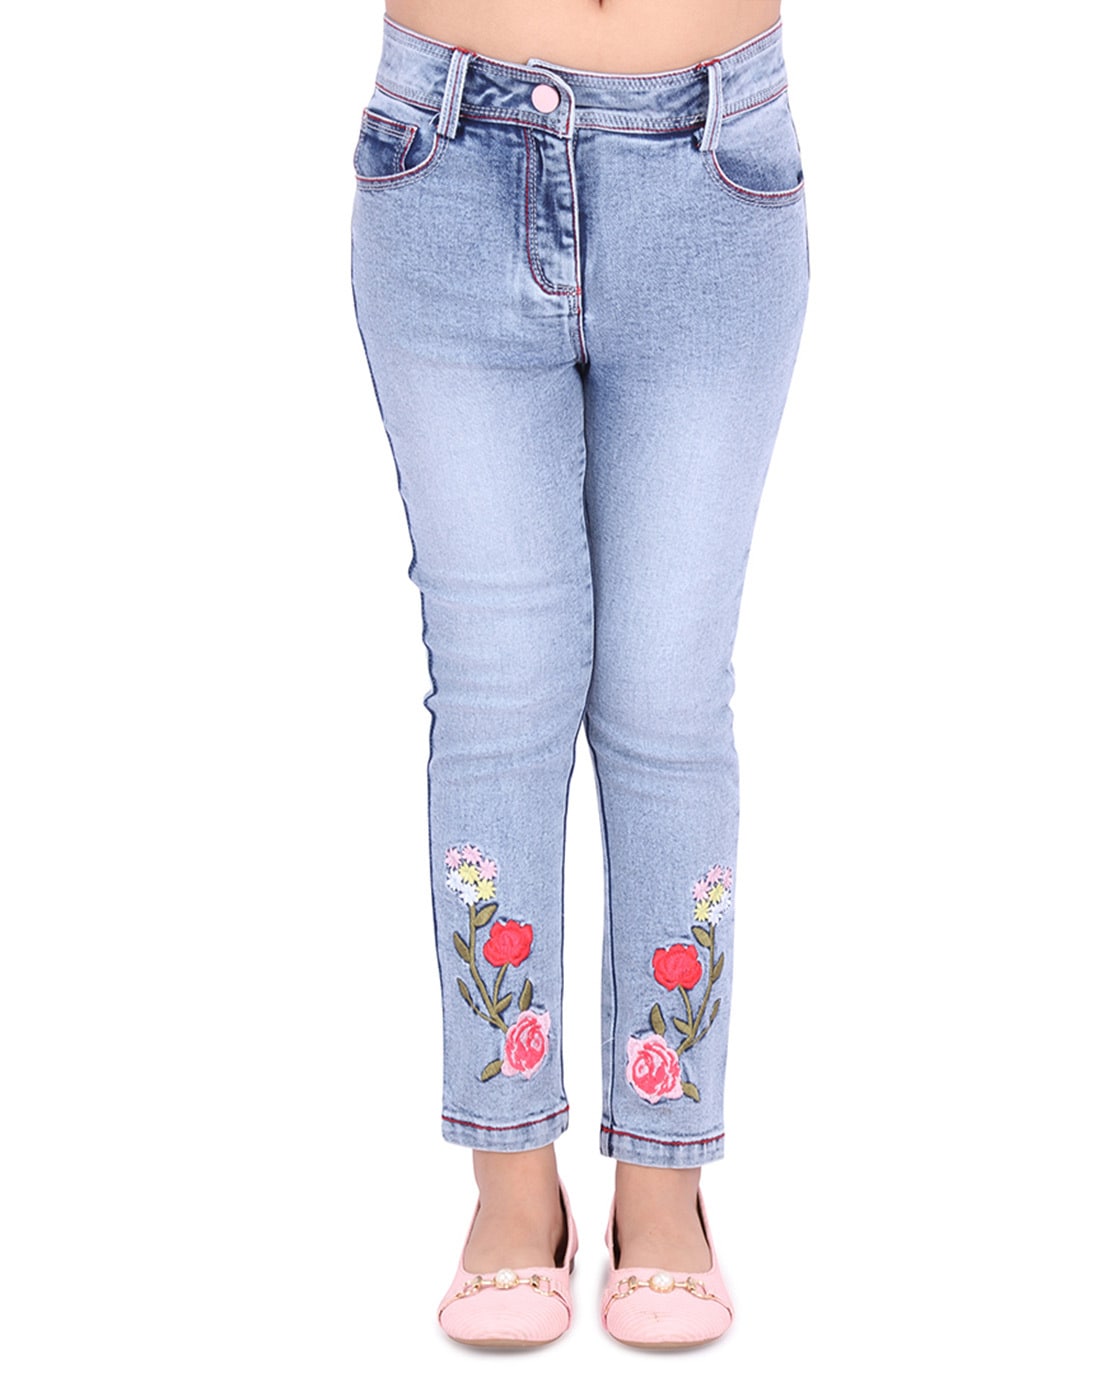 Reveal more than 137 ankle jeans for girls